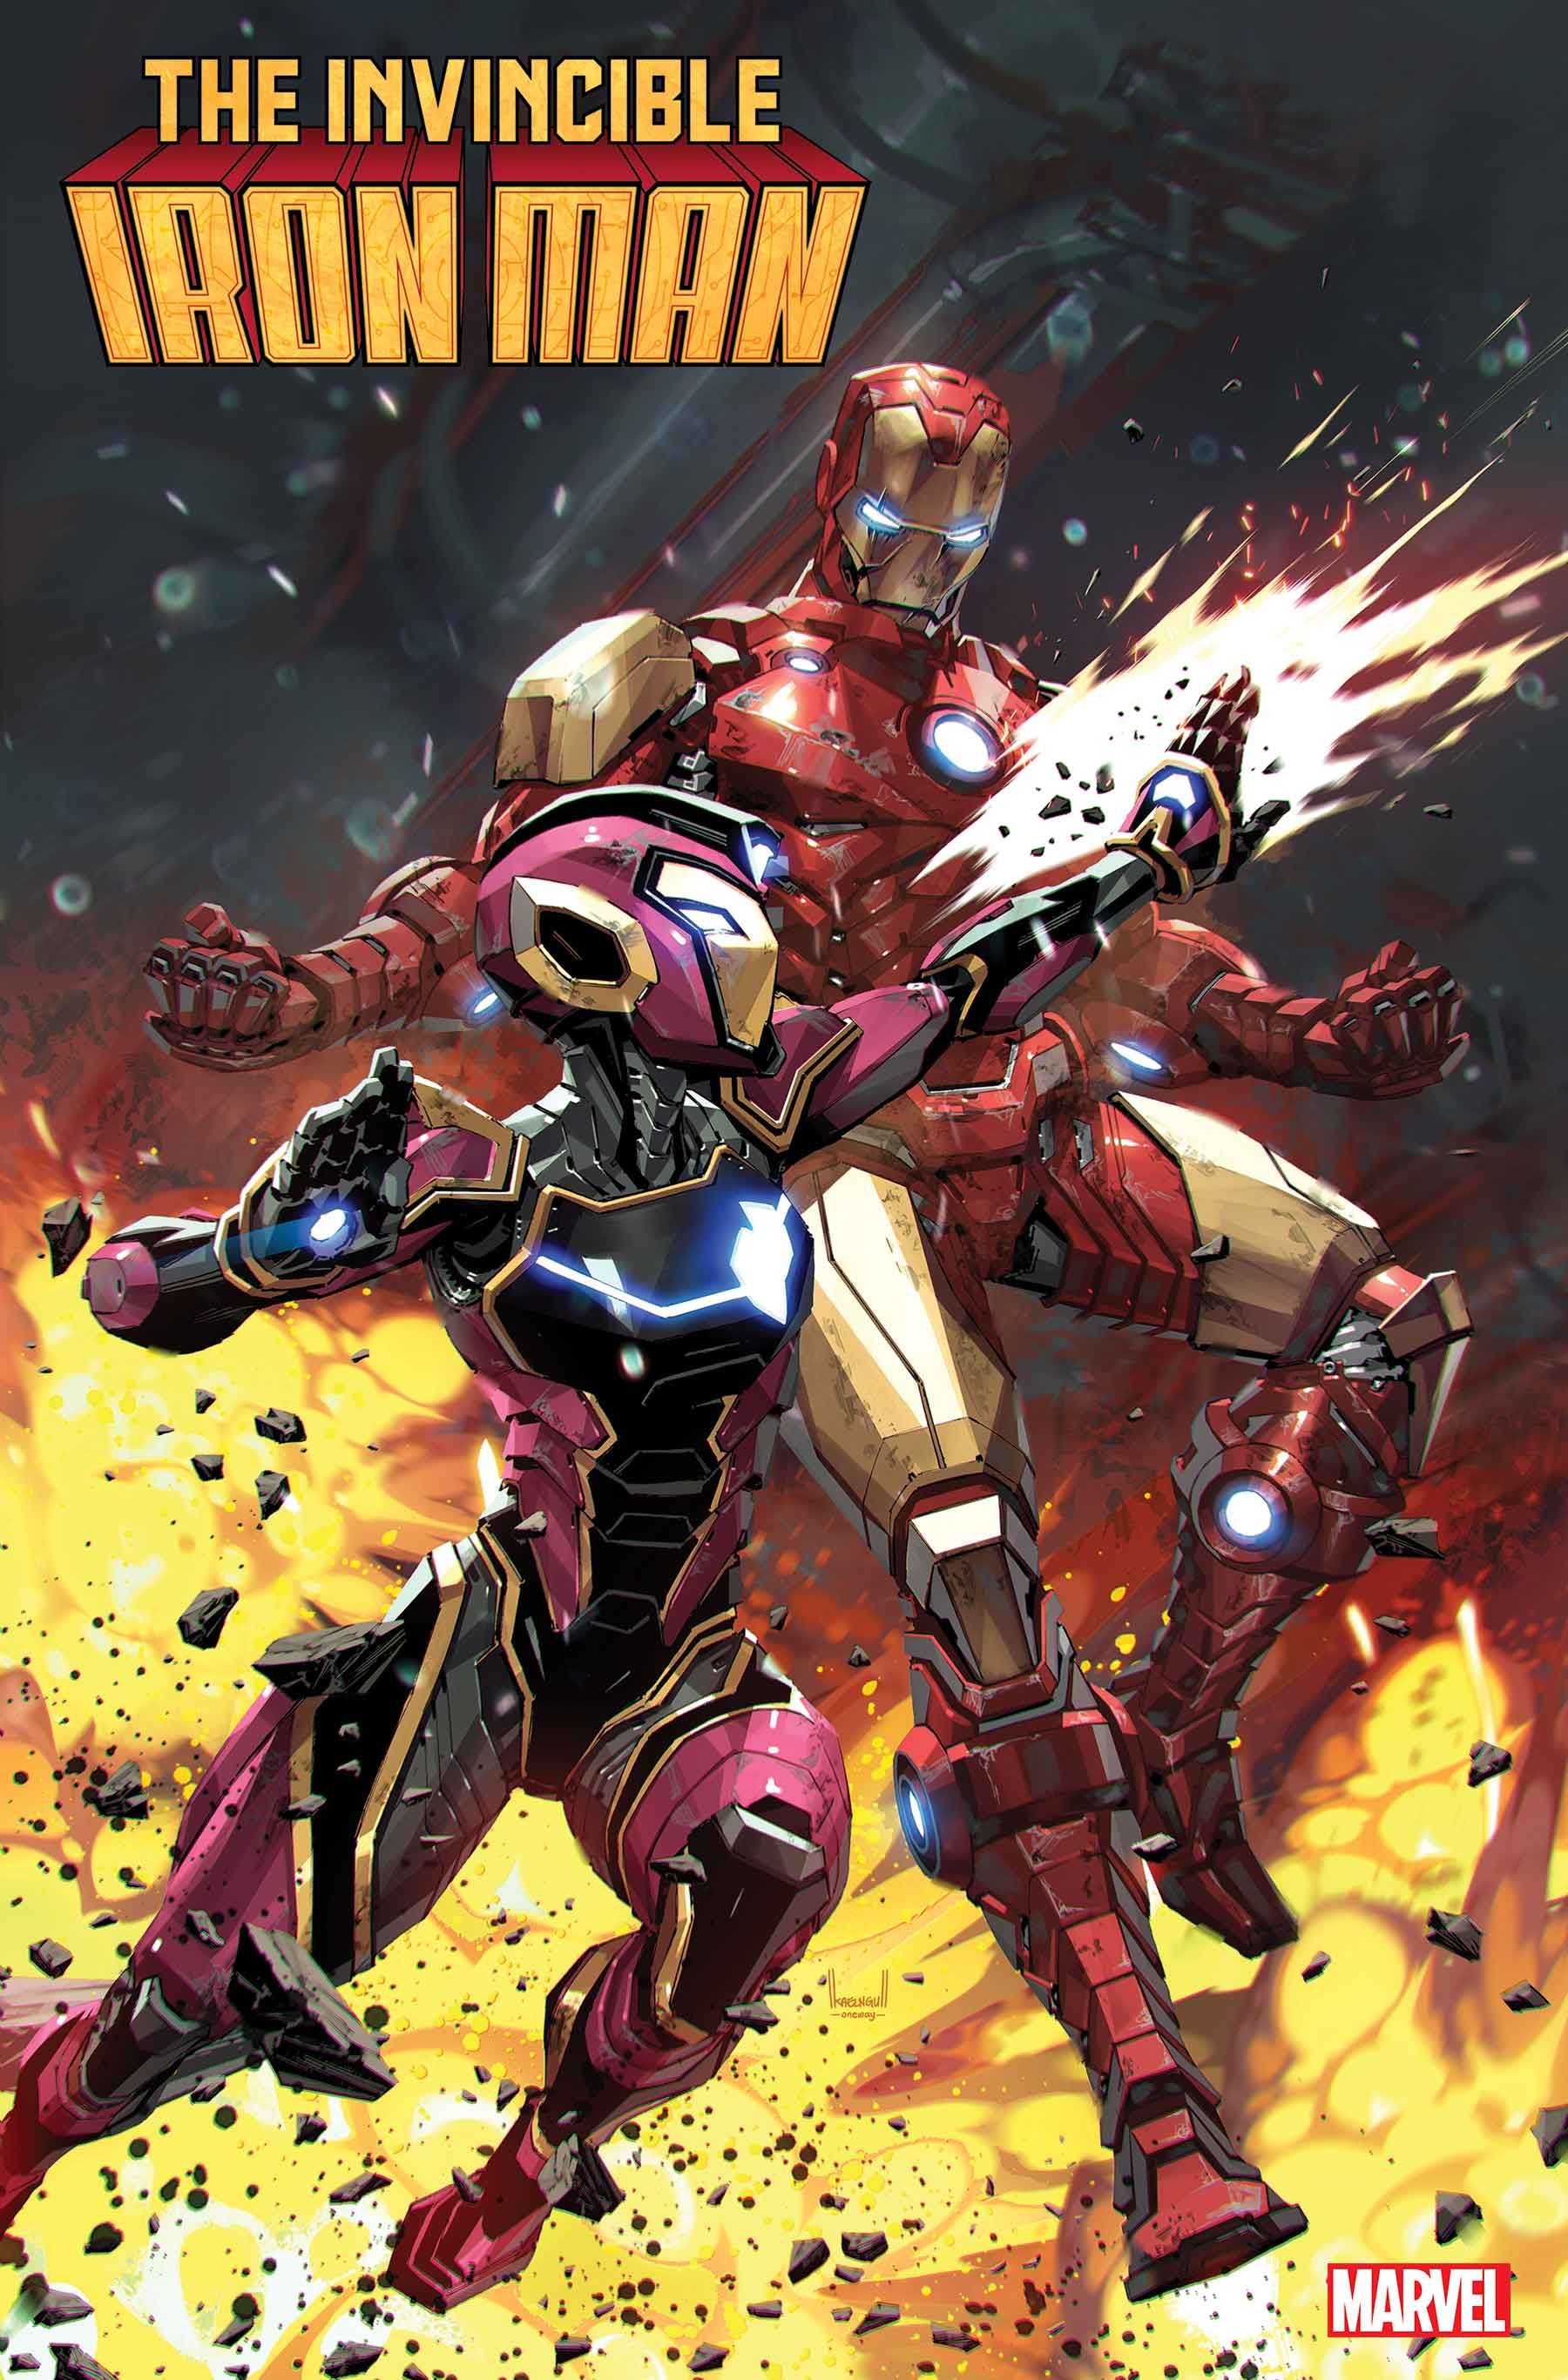 Iron Man Is About to Wage a New Armor War - Against Ironheart